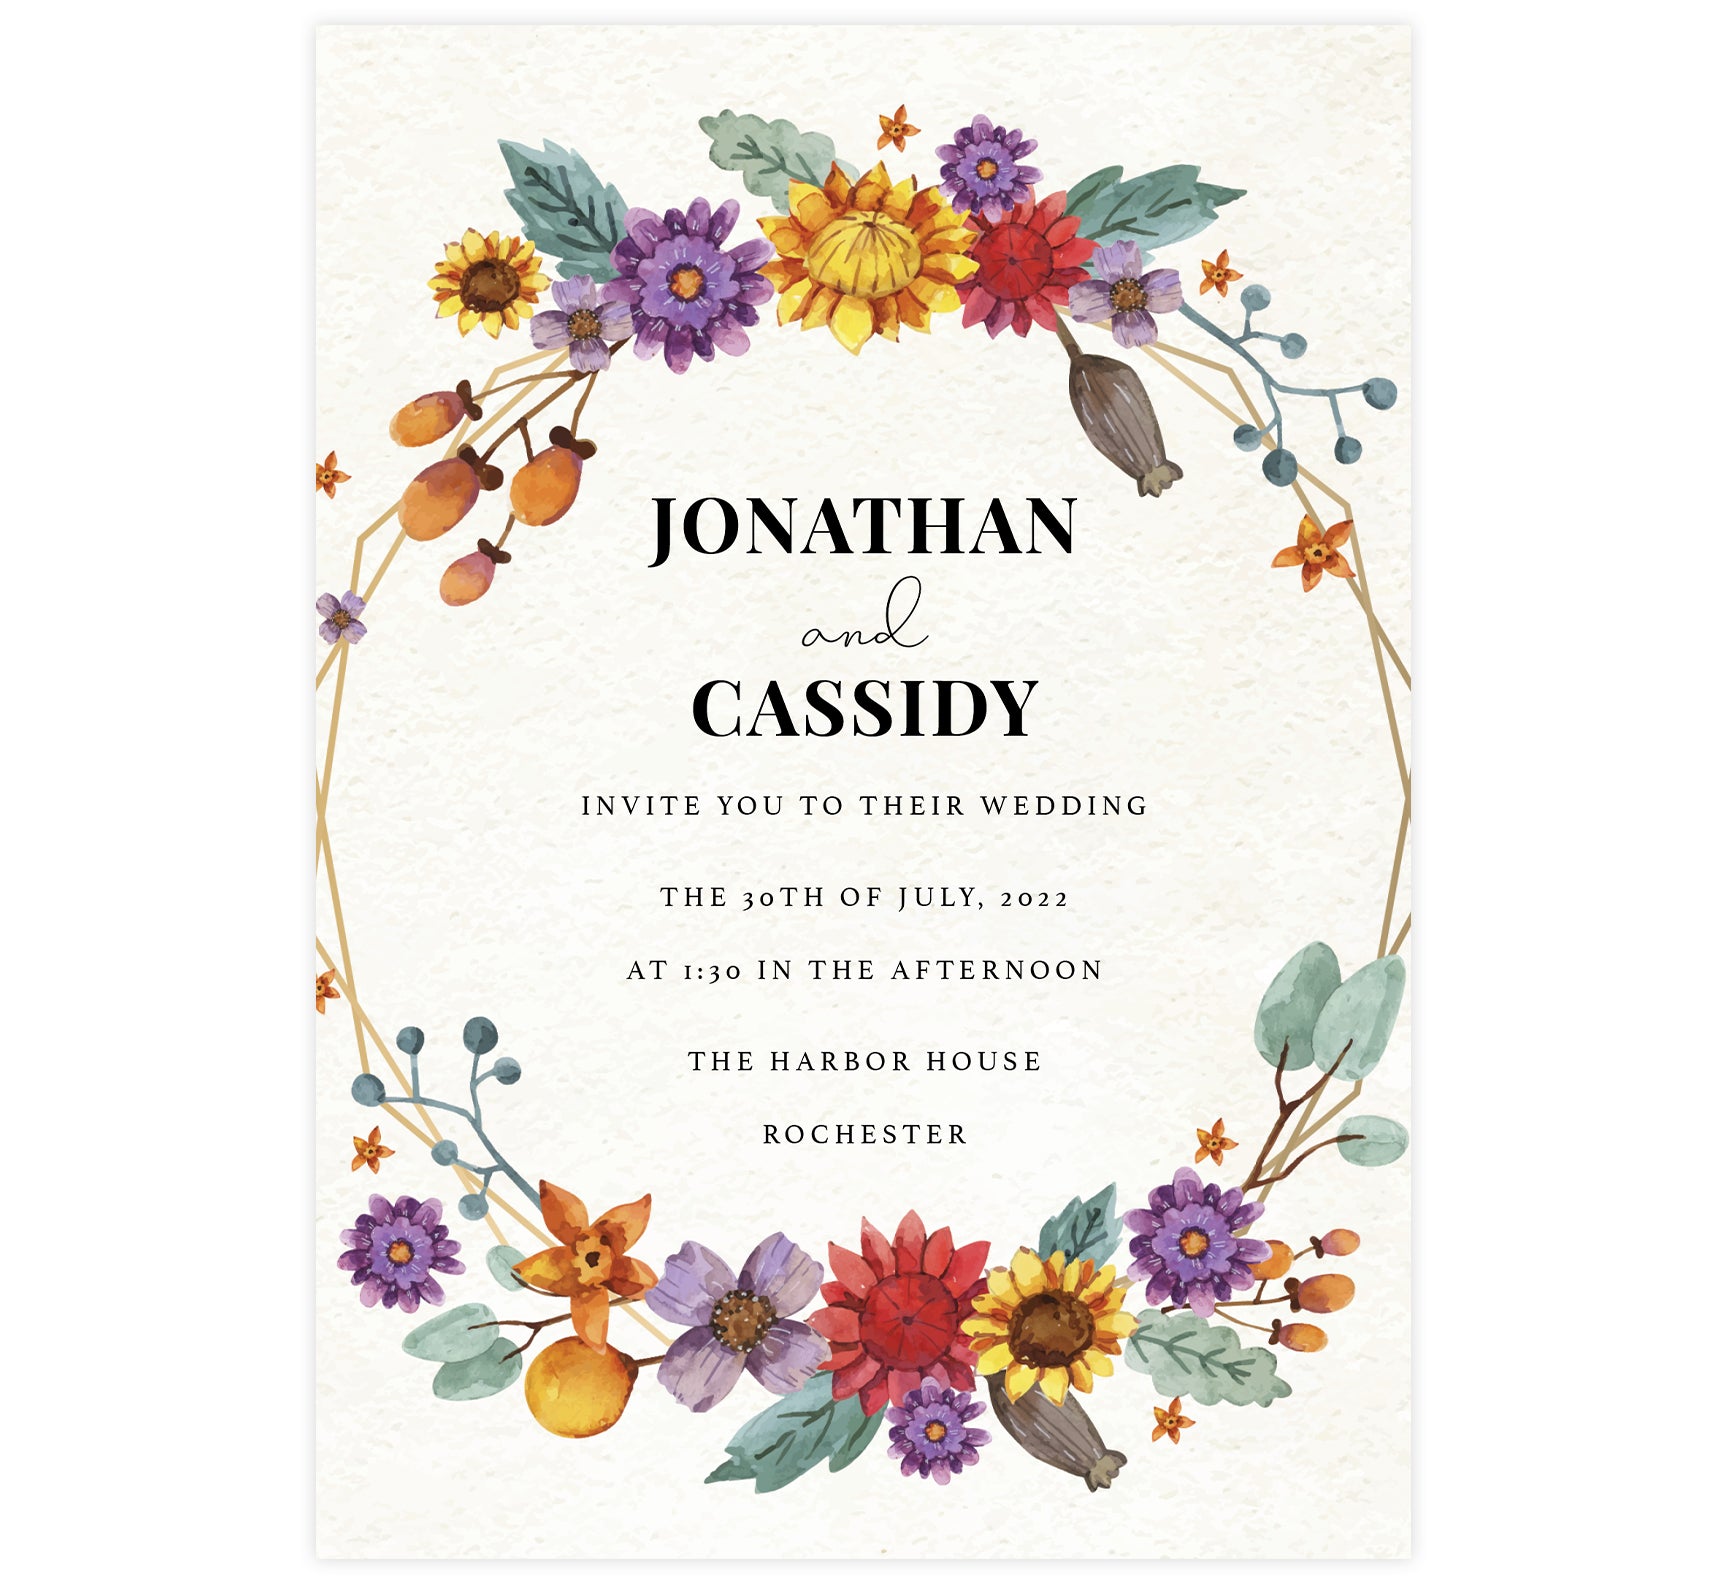 Colorful Floral Frame wedding invitation; textured background with colorful, circular floral frame and black text.